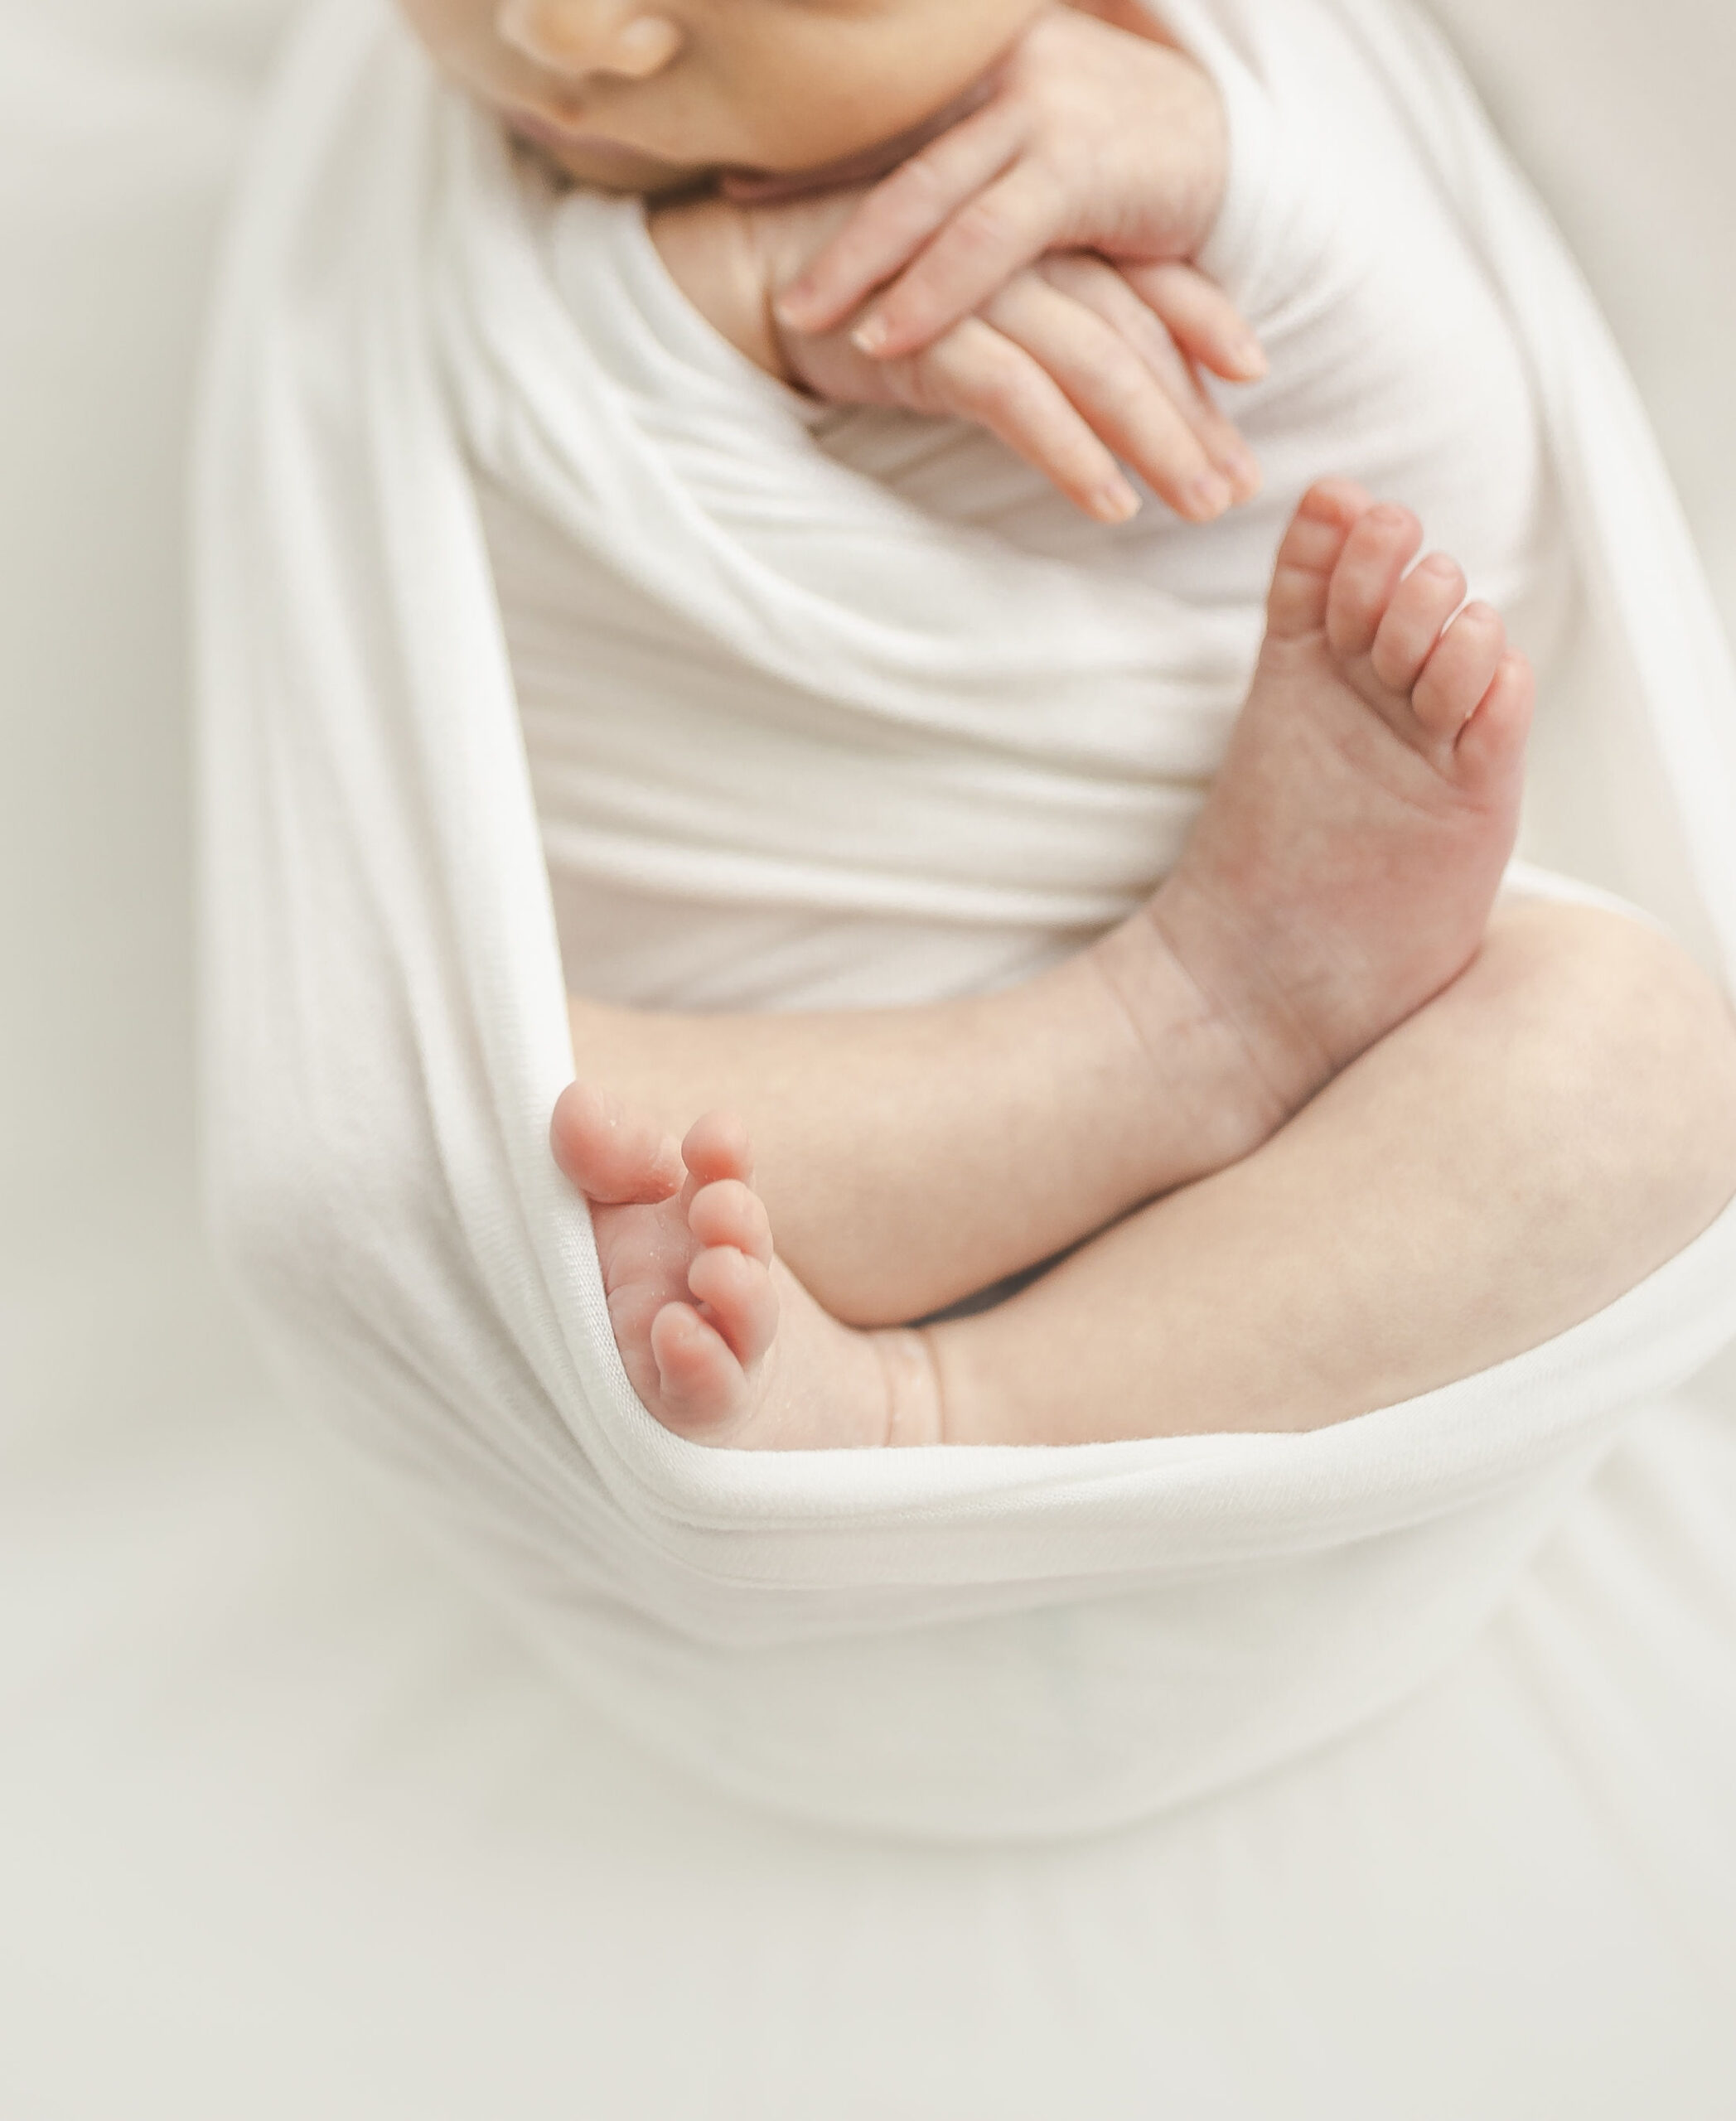 Details of a newborn baby sleeping in a white swaddle with feet and hands out your 4d baby miami